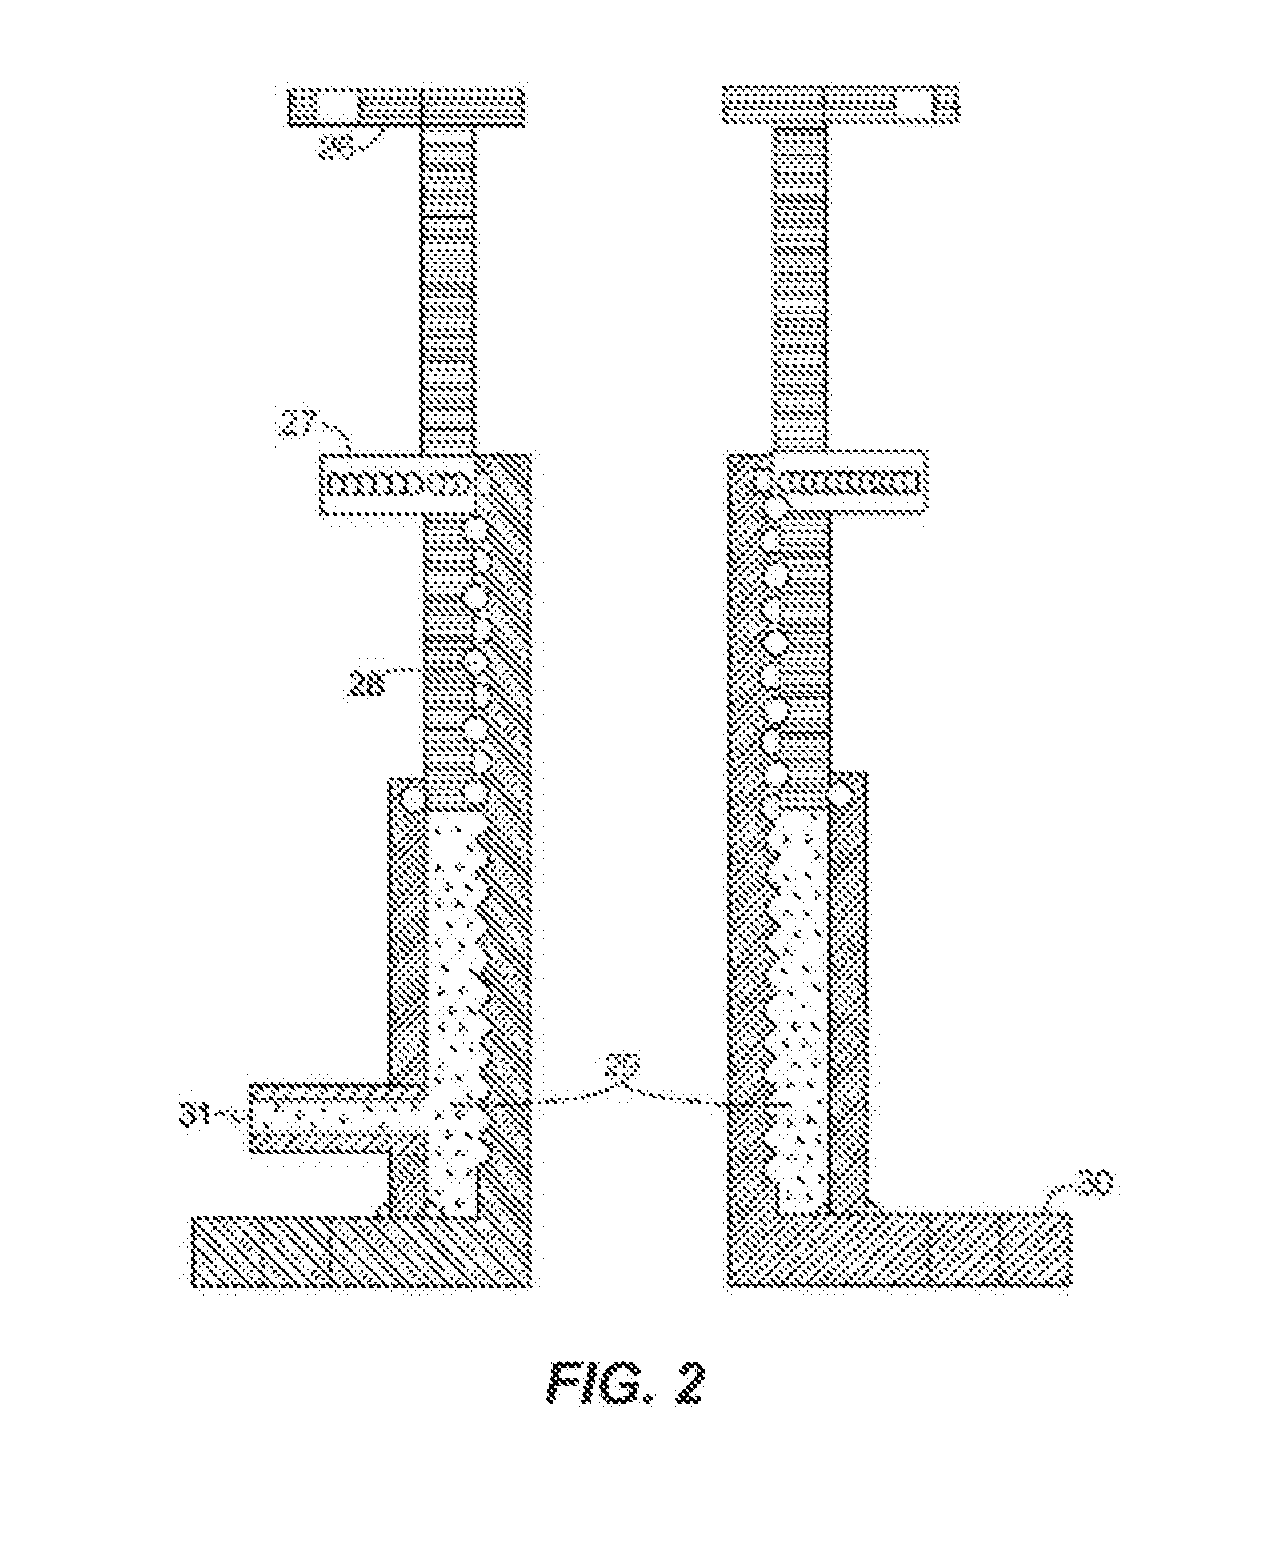 System, apparatus and method for abrasive jet fluid cutting